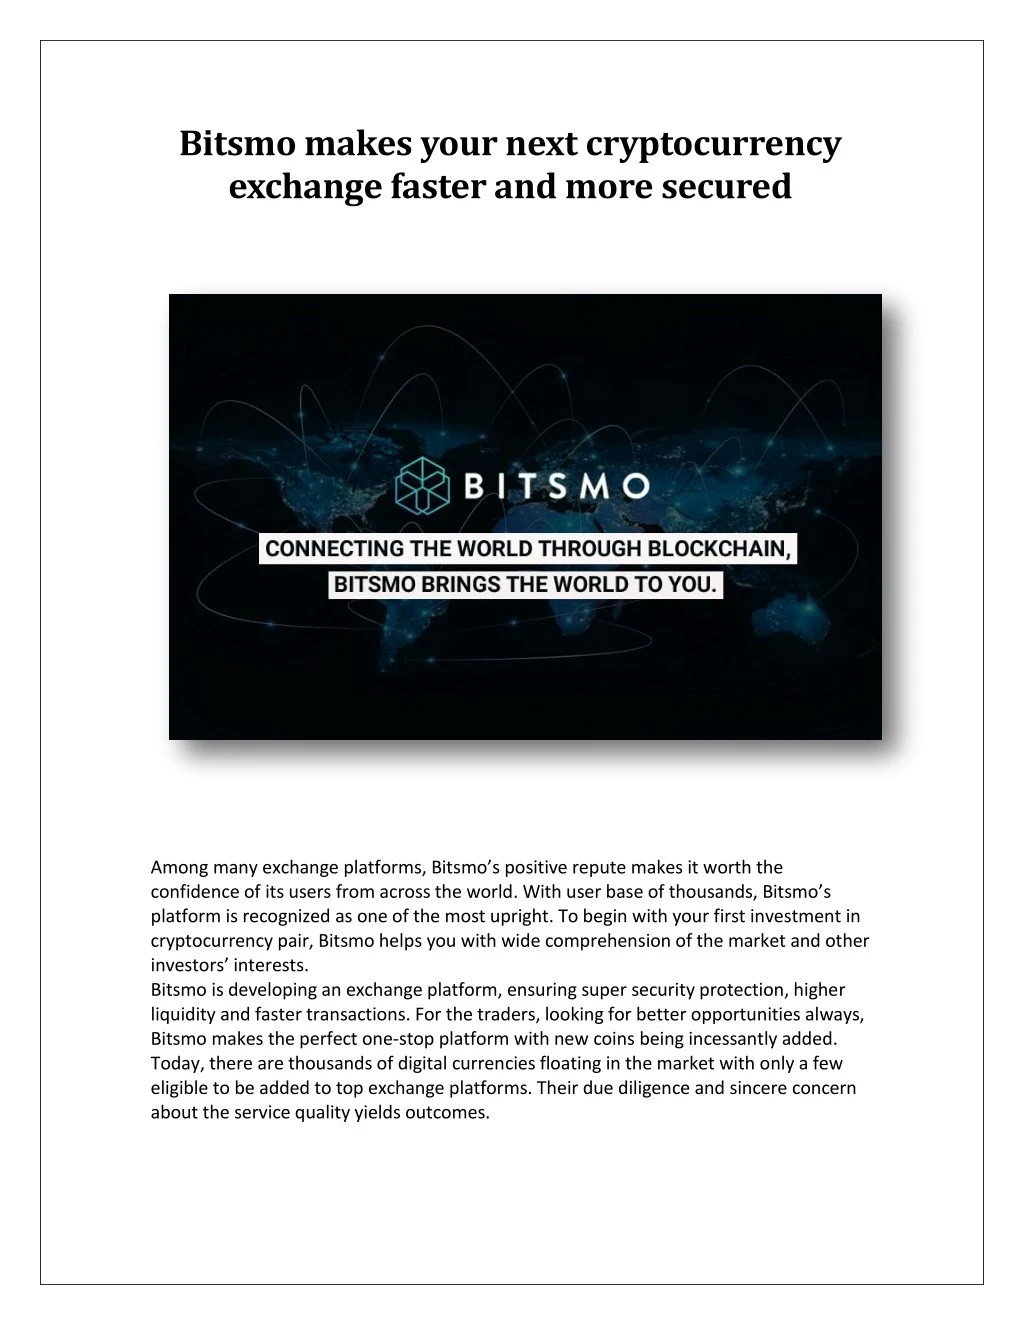 bitsmo makes your next cryptocurrency exchange